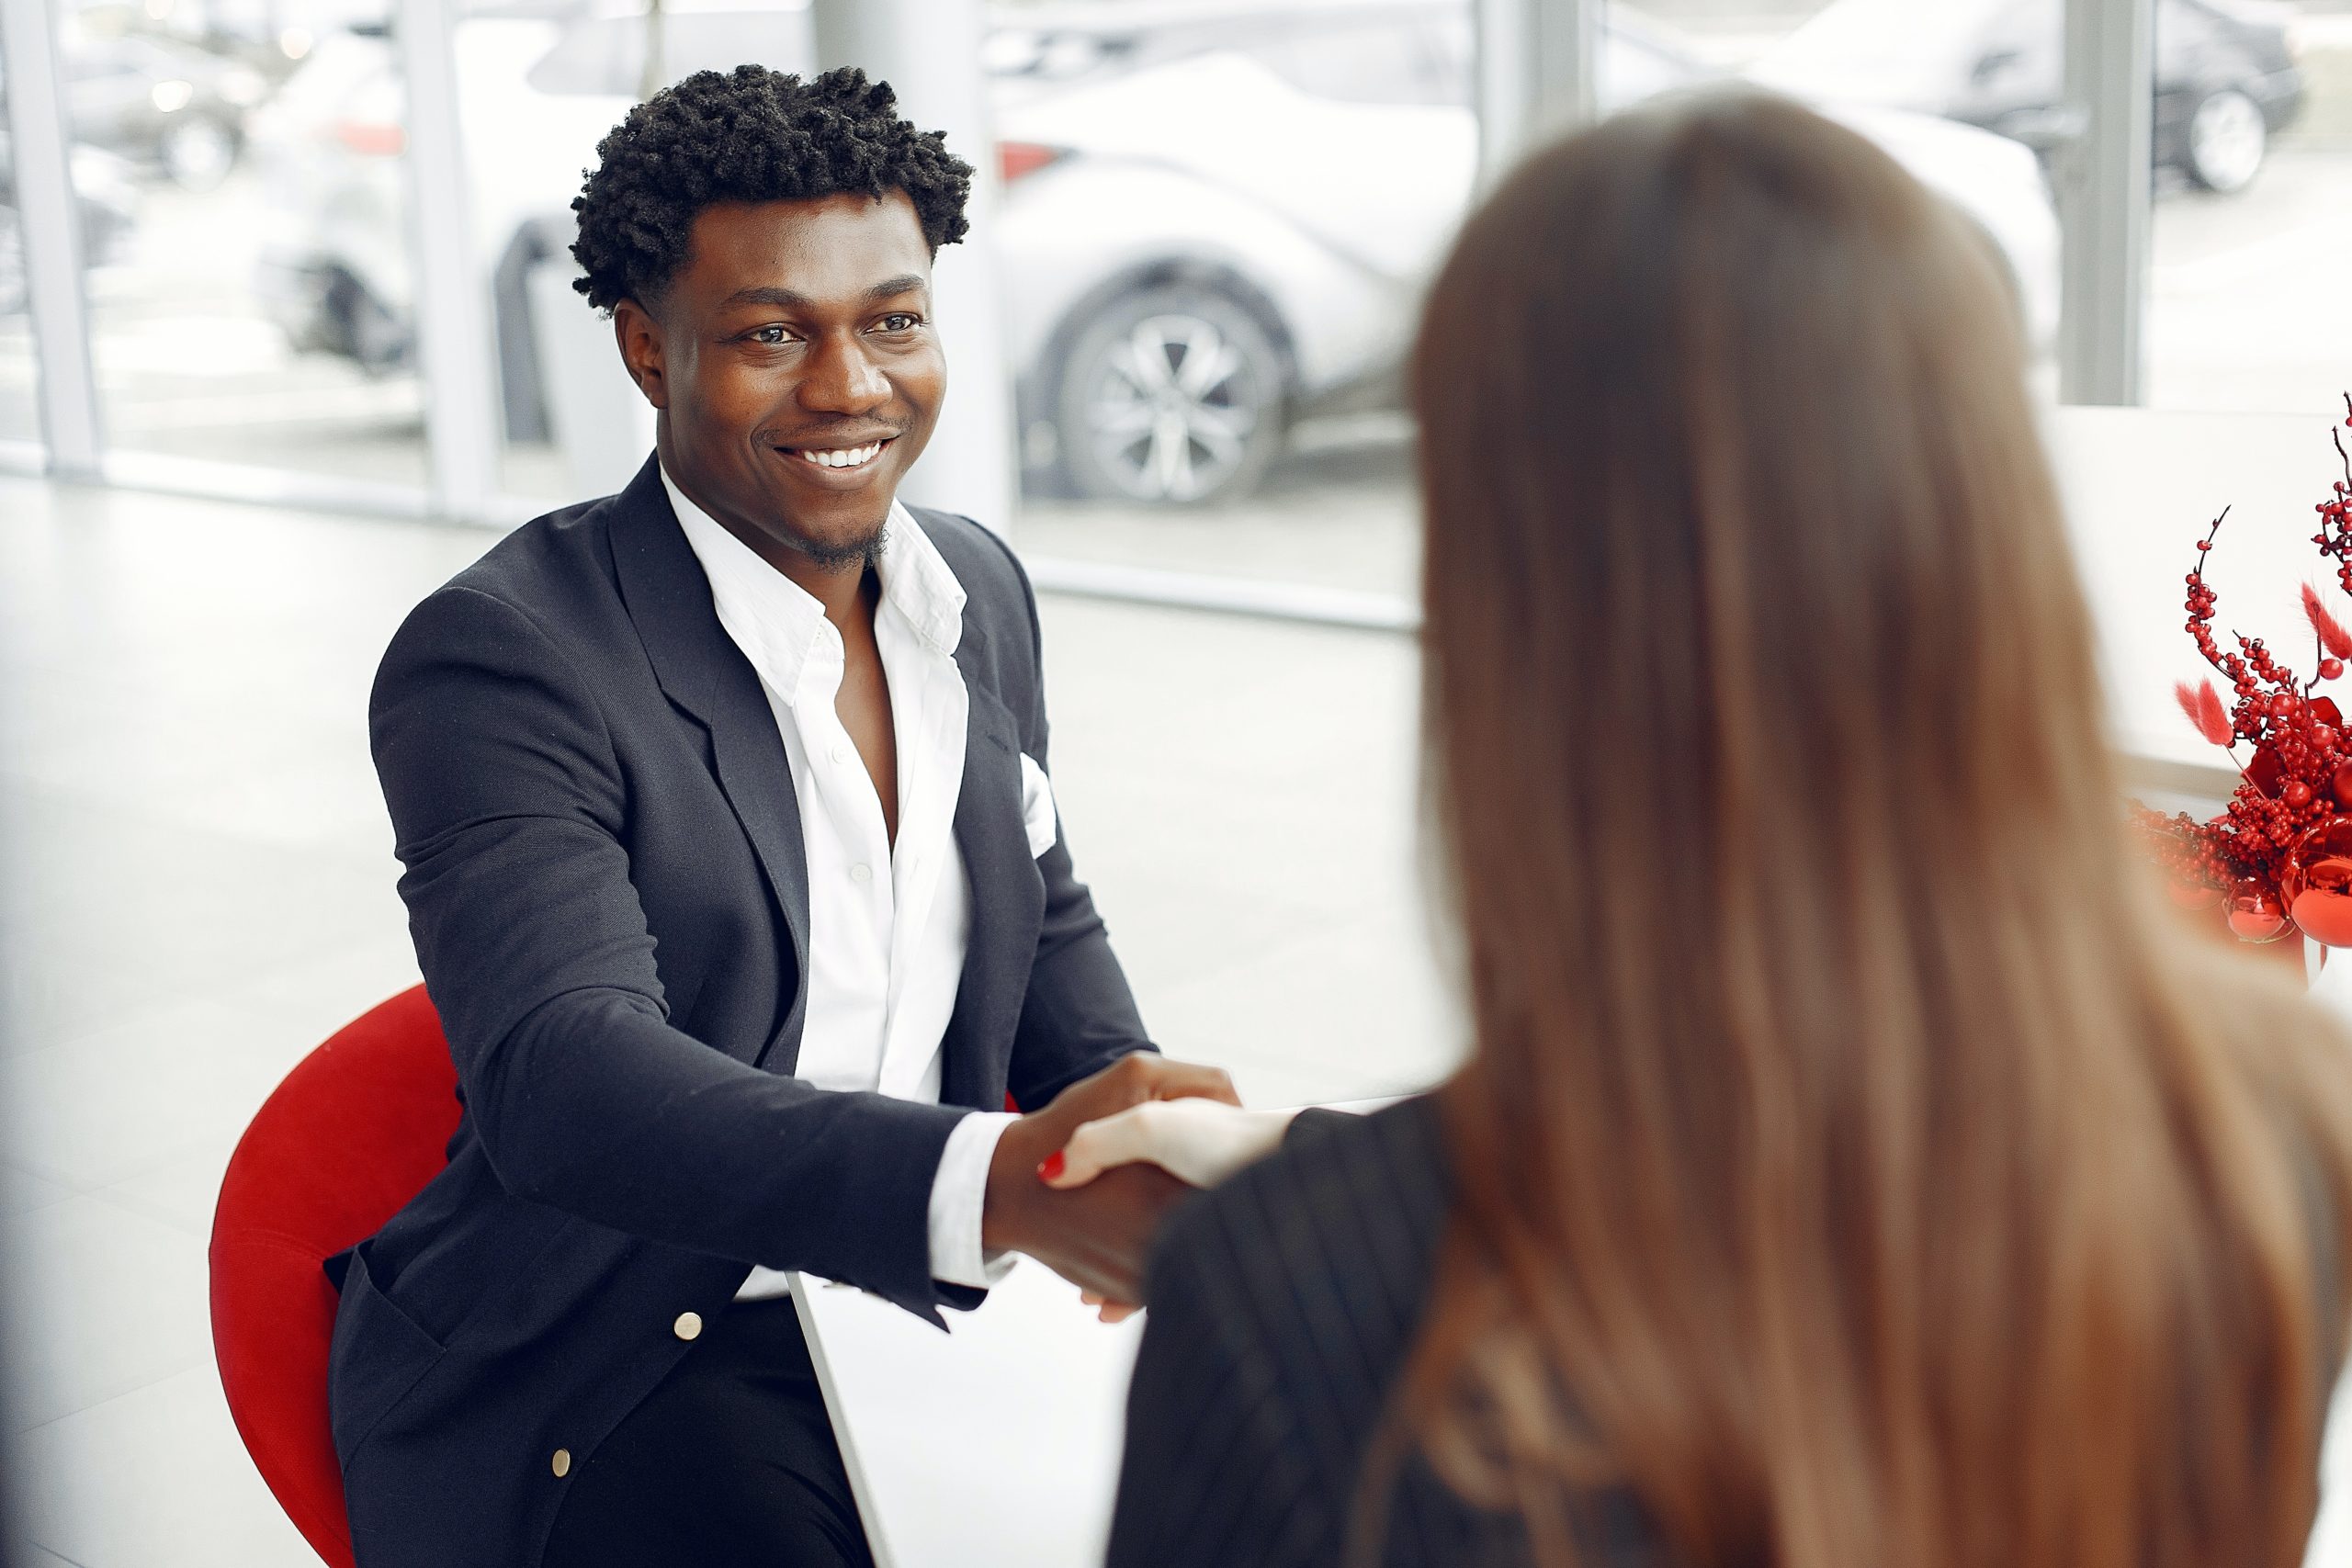 How to sell more cars at a dealership?